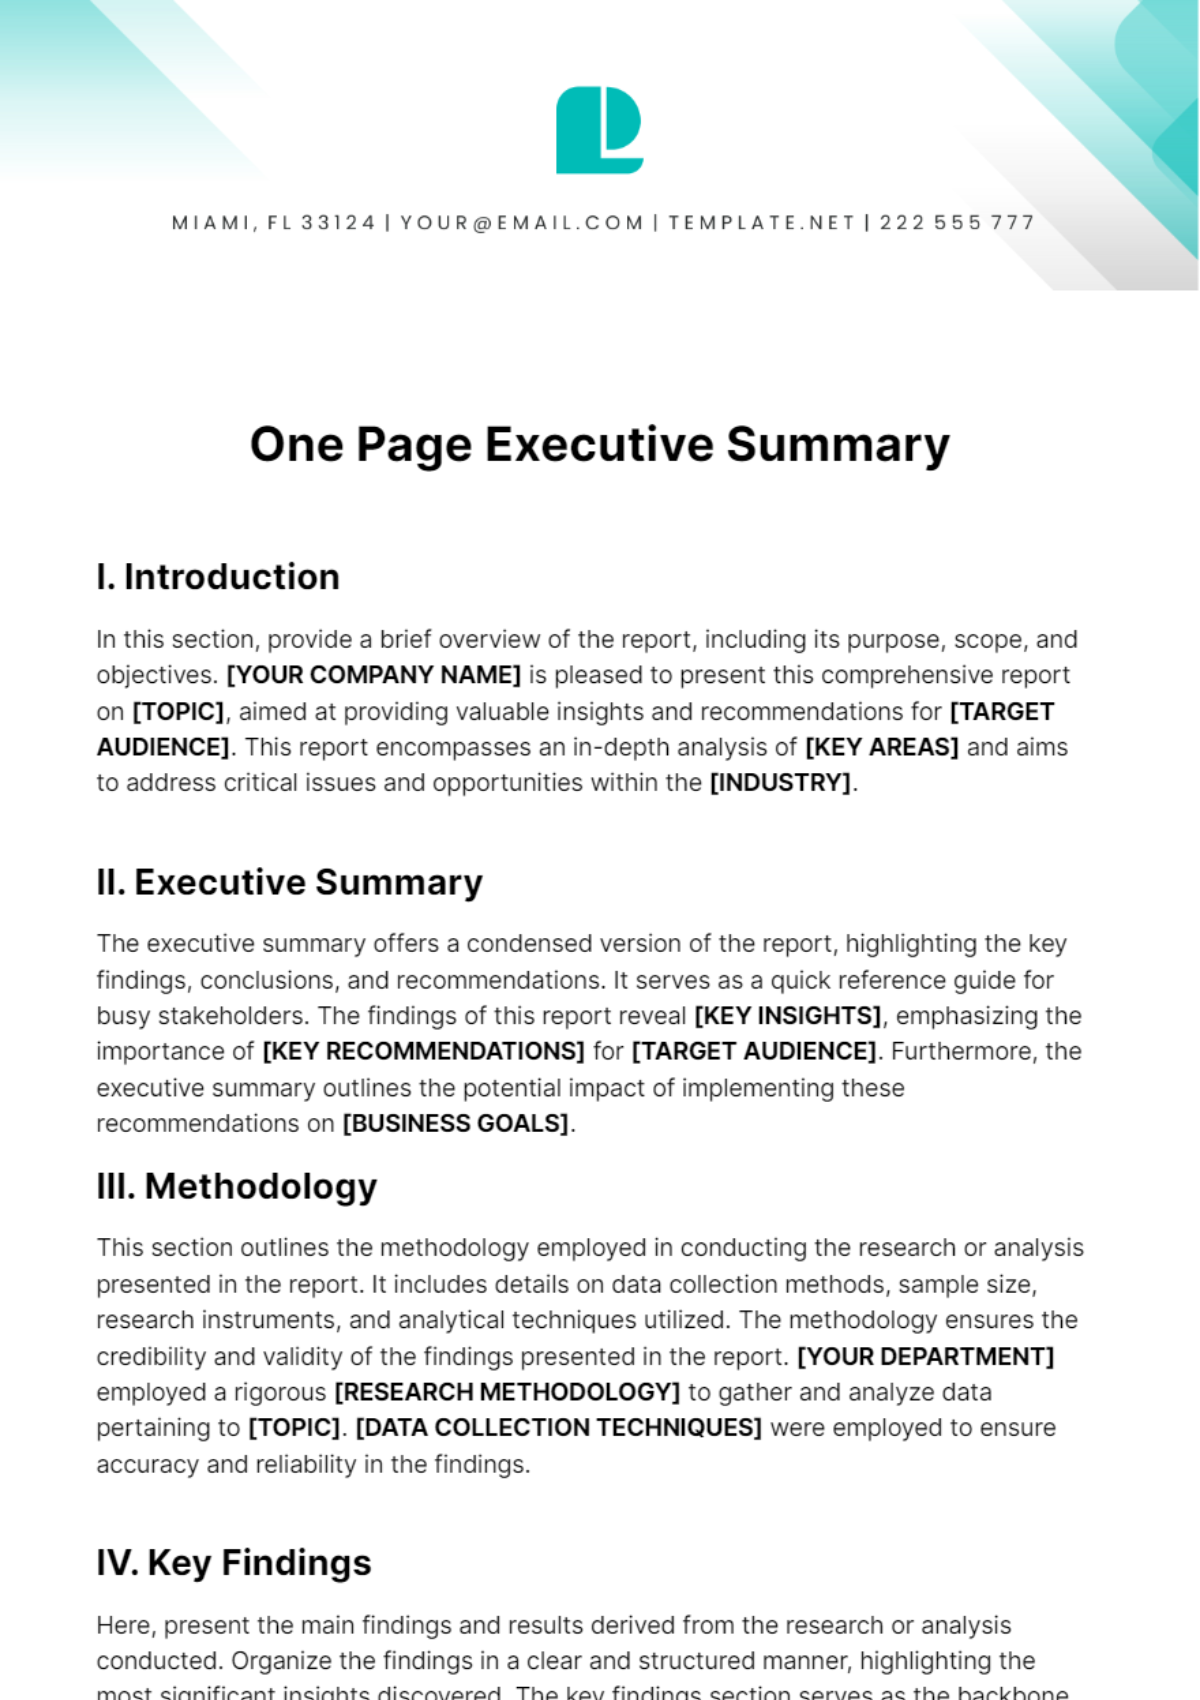 One Page Executive Summary Template